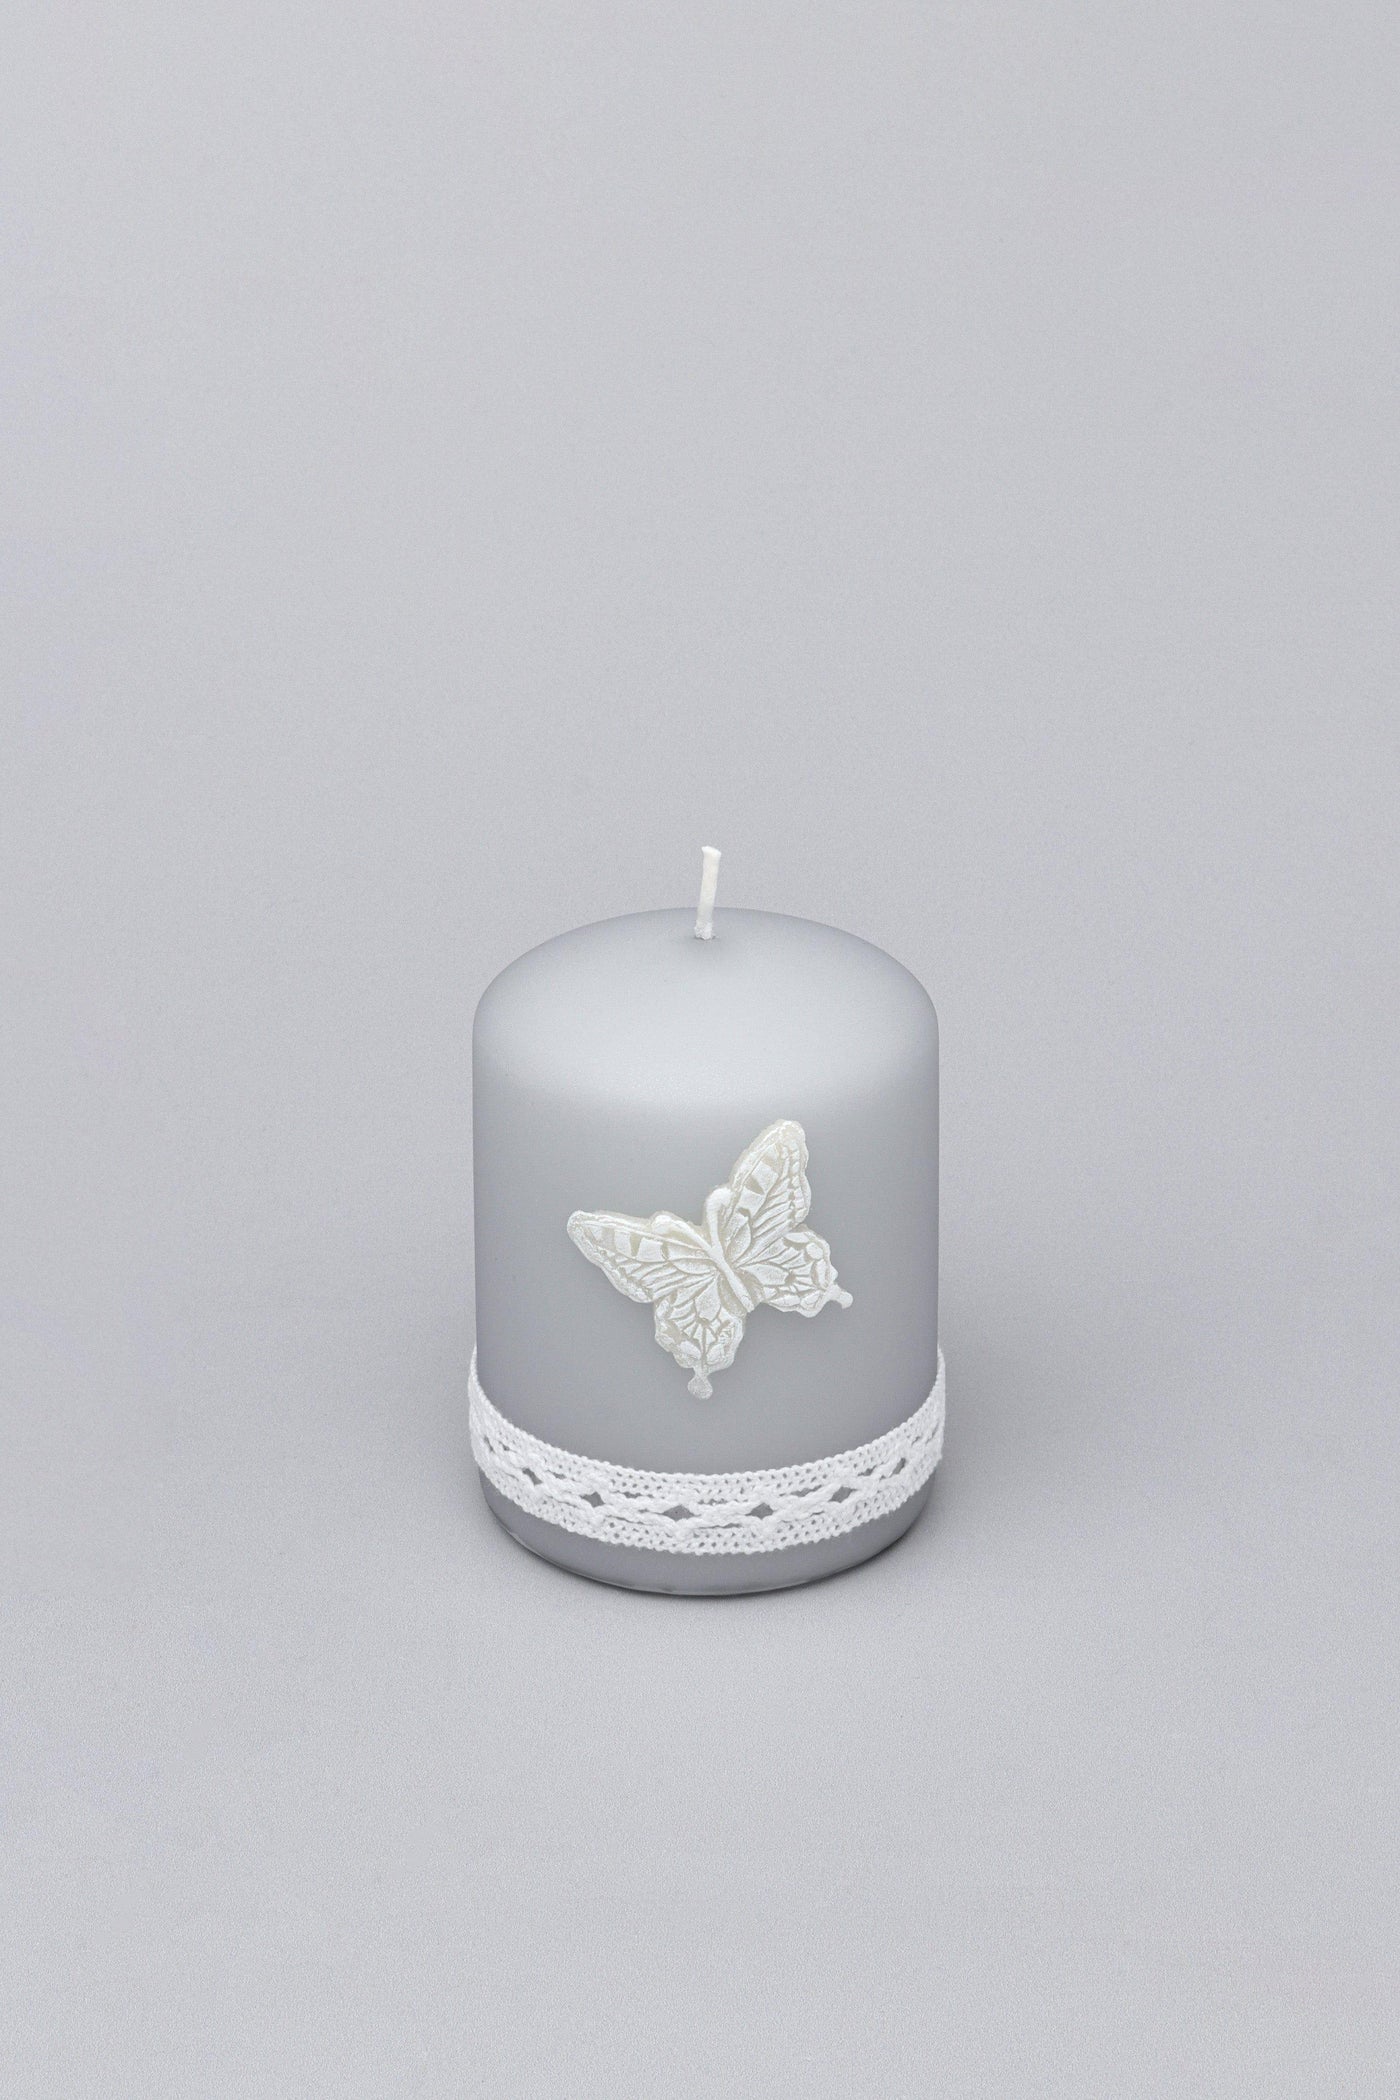 G Decor Candles Grey / Small Emilie Butterfly Grey Lace Pillar Candle